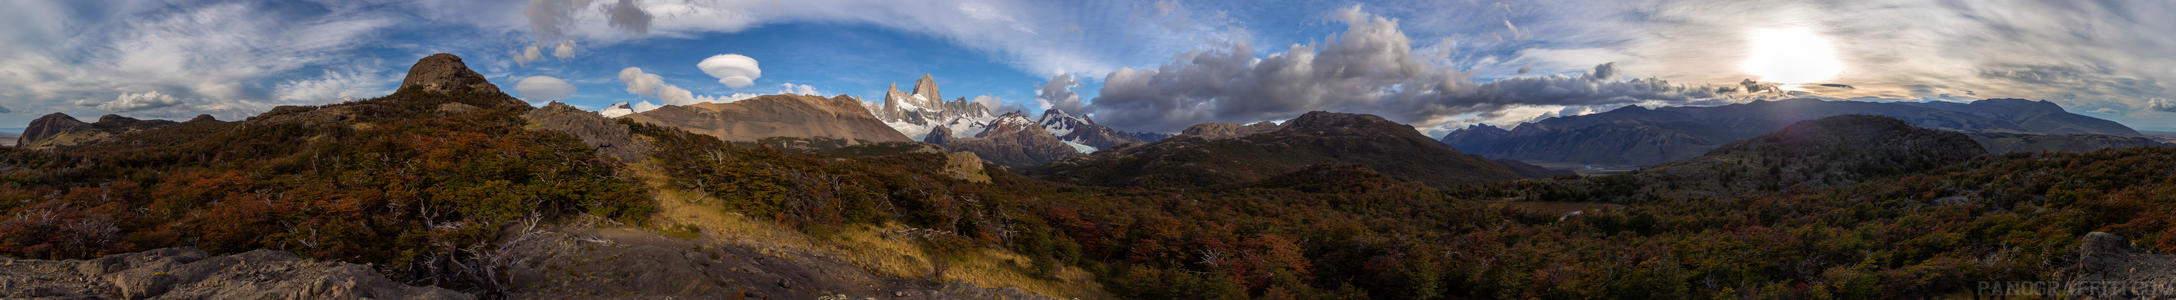 Fitz Roy Mirador 360 - A 360 degree view of the beautiful autumn colors surrounding the Fitz Roy peaks